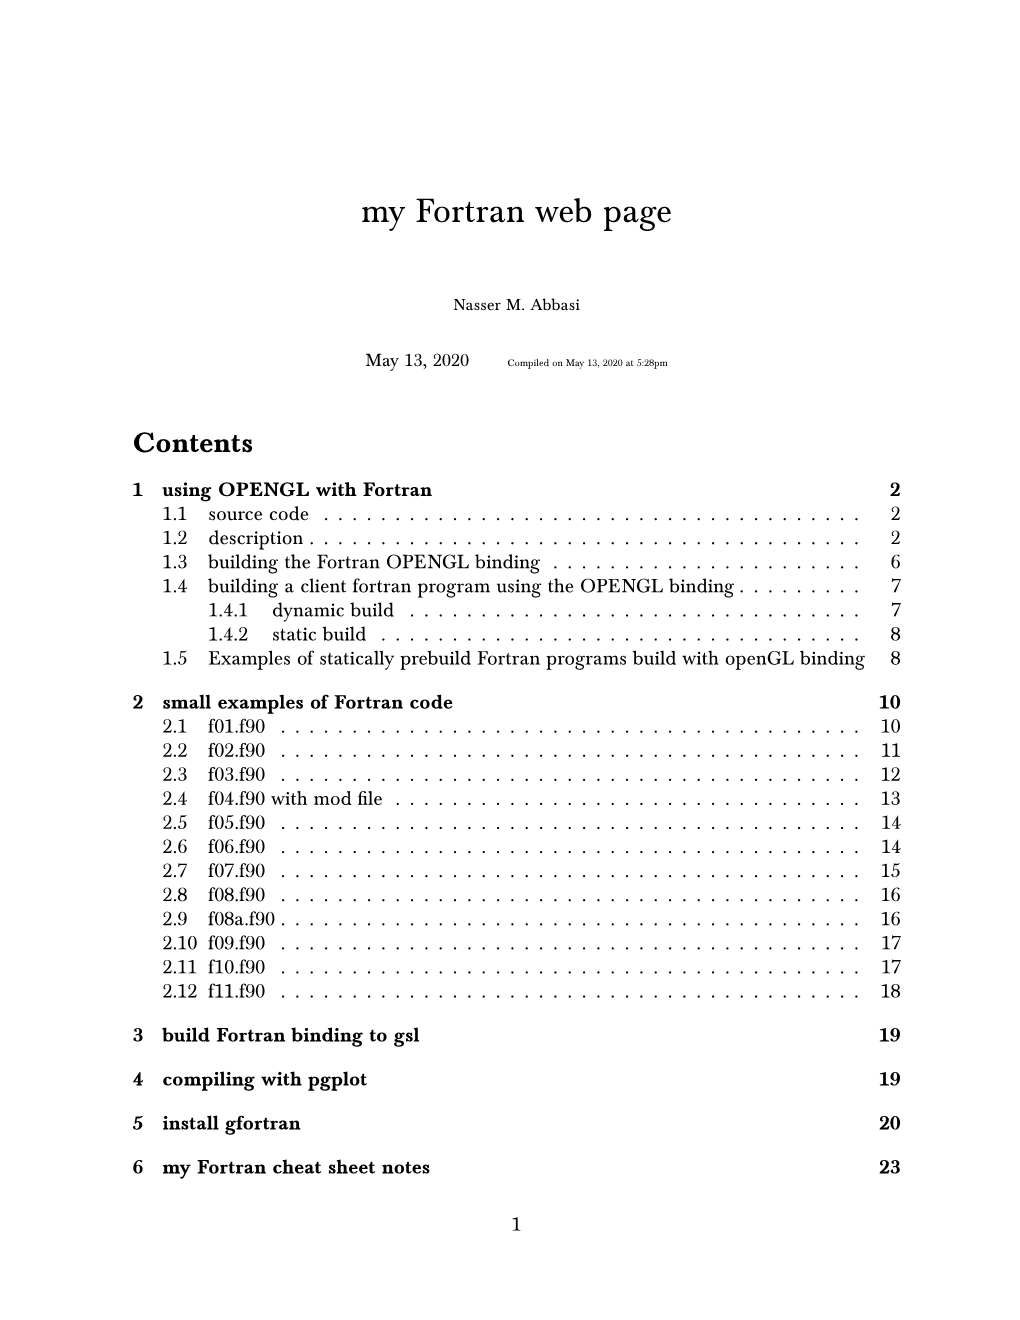 My Fortran Web Page